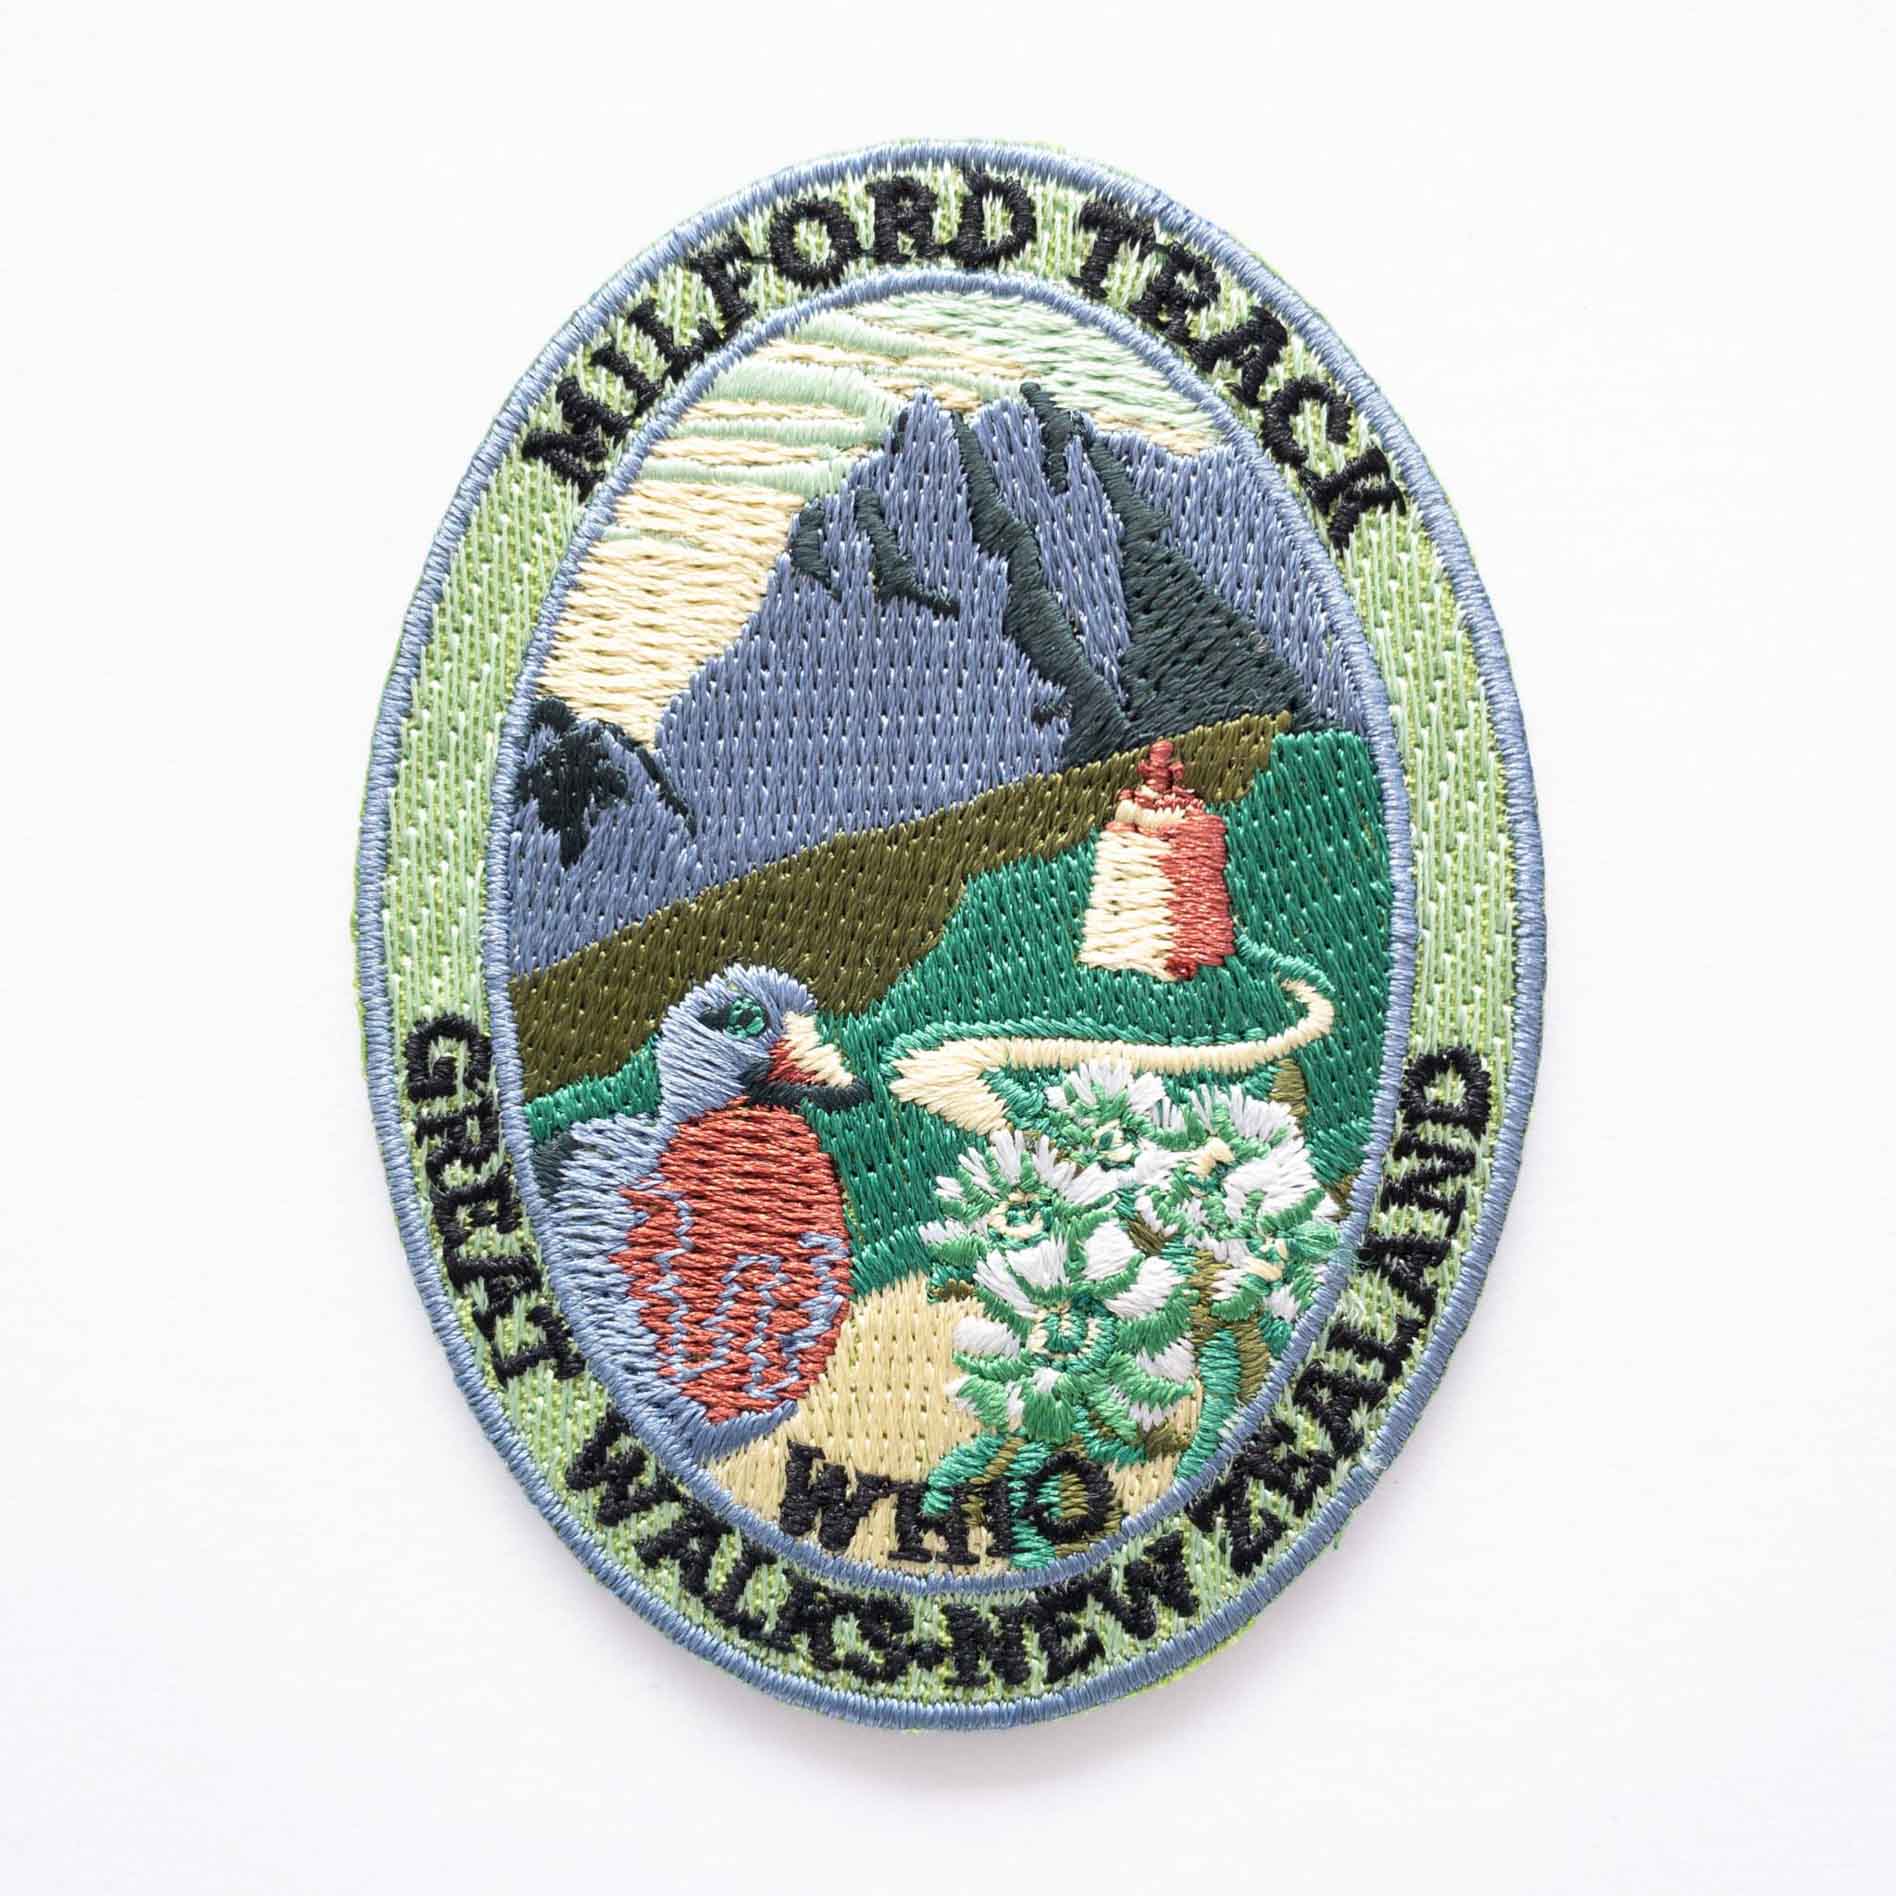 Oval, embroidered Milford Track patch, with a whio/blue duck, blue peak and mountain buttercup.